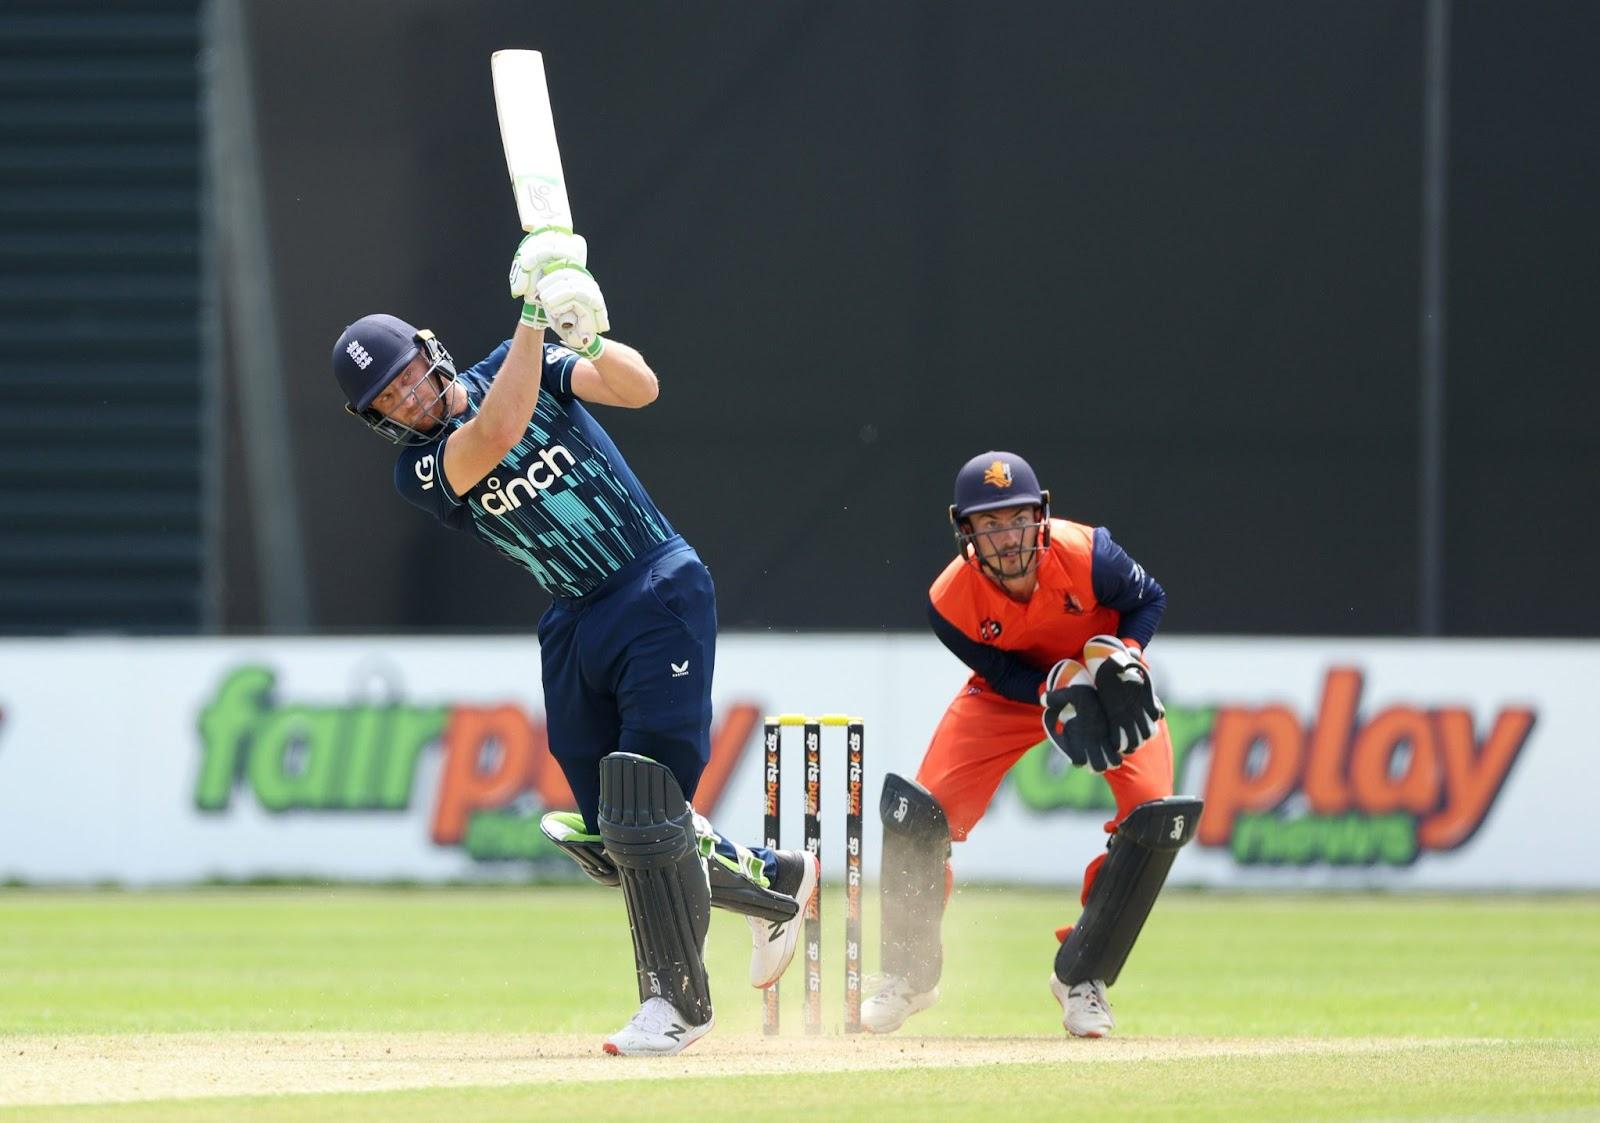 Jos Buttler’s unbeaten 162-run knock came in just 70 balls with a strike rate of 231